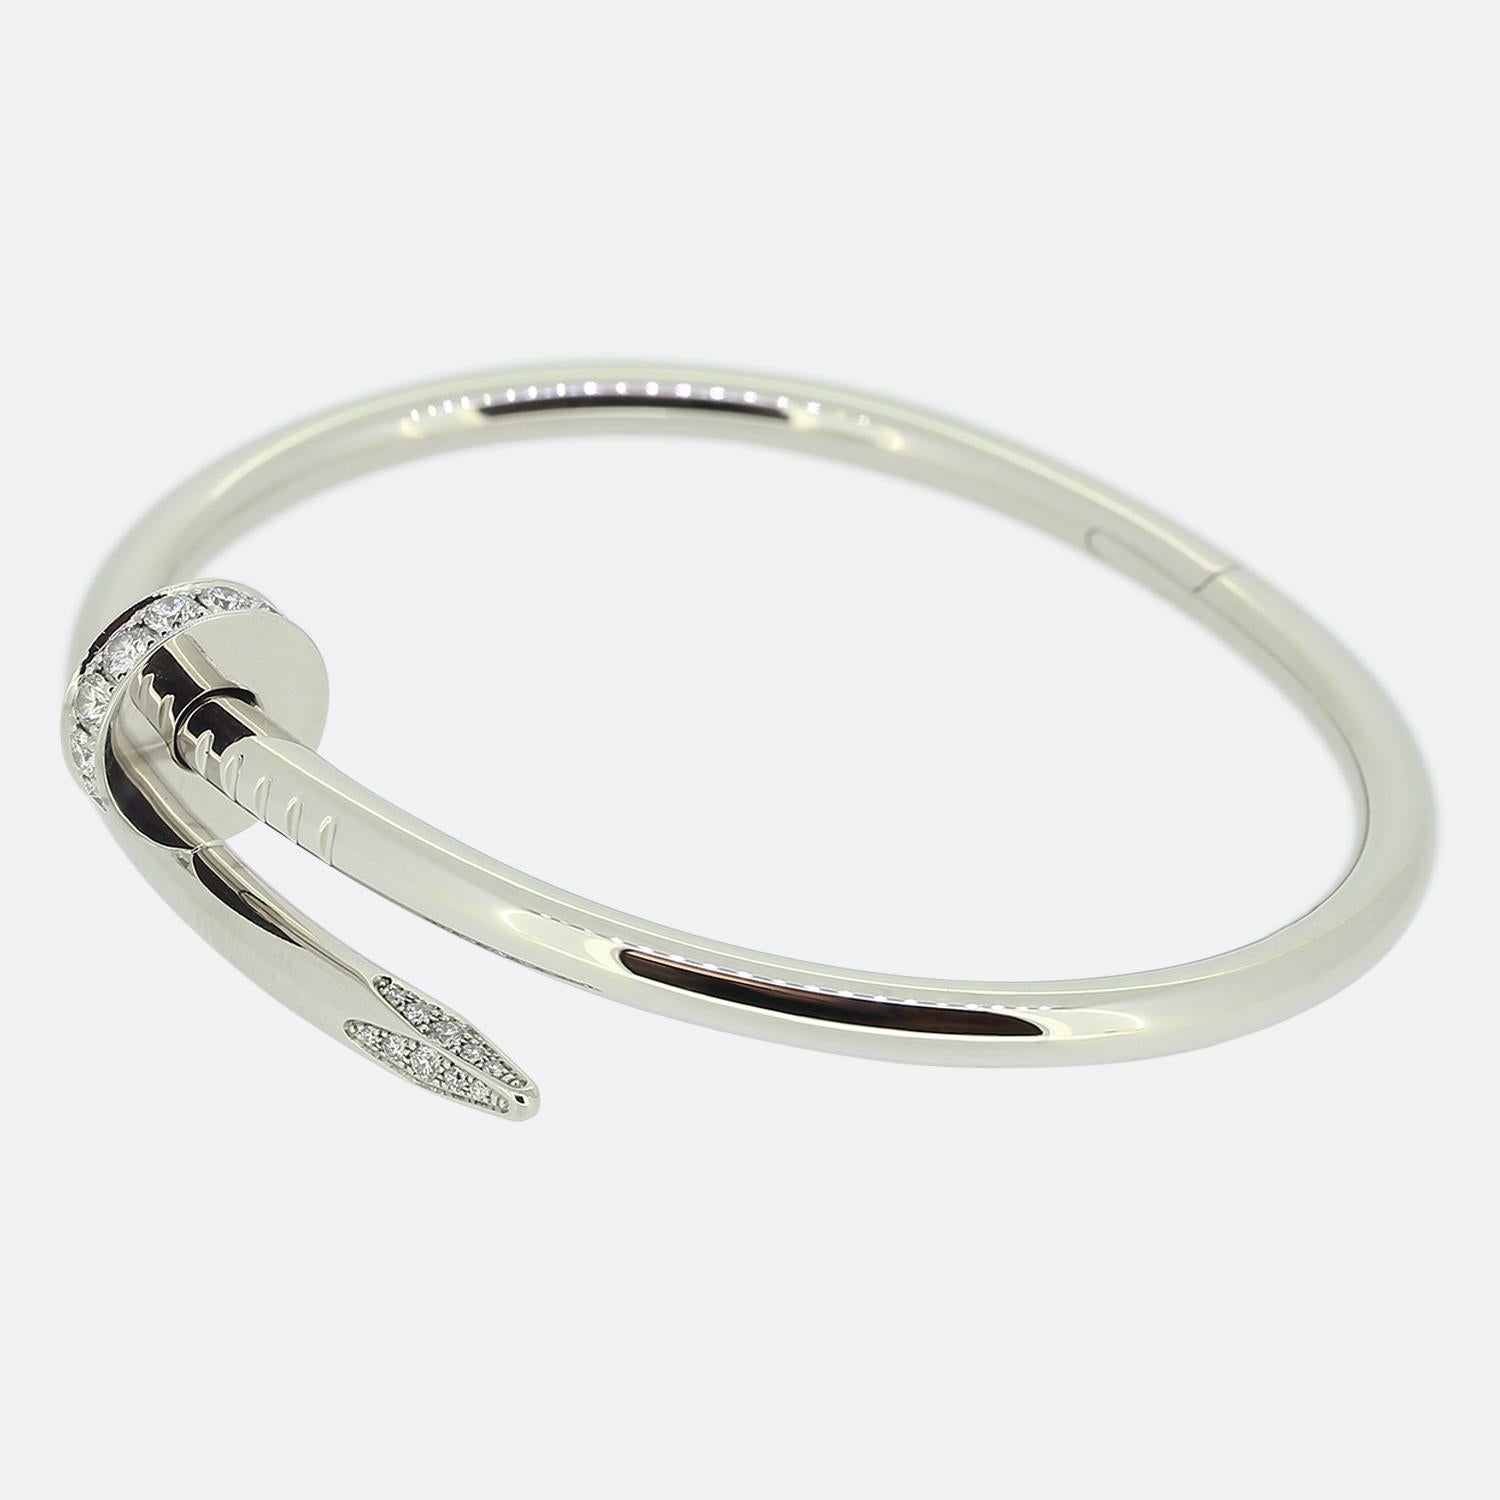 Here we have an 18ct white gold bracelet from the world renowned luxury jewellery house of Cartier. This piece forms part of their iconic Juste un Clou collection and showcases a wrap around nail design with a diamond set head and tip. This is the